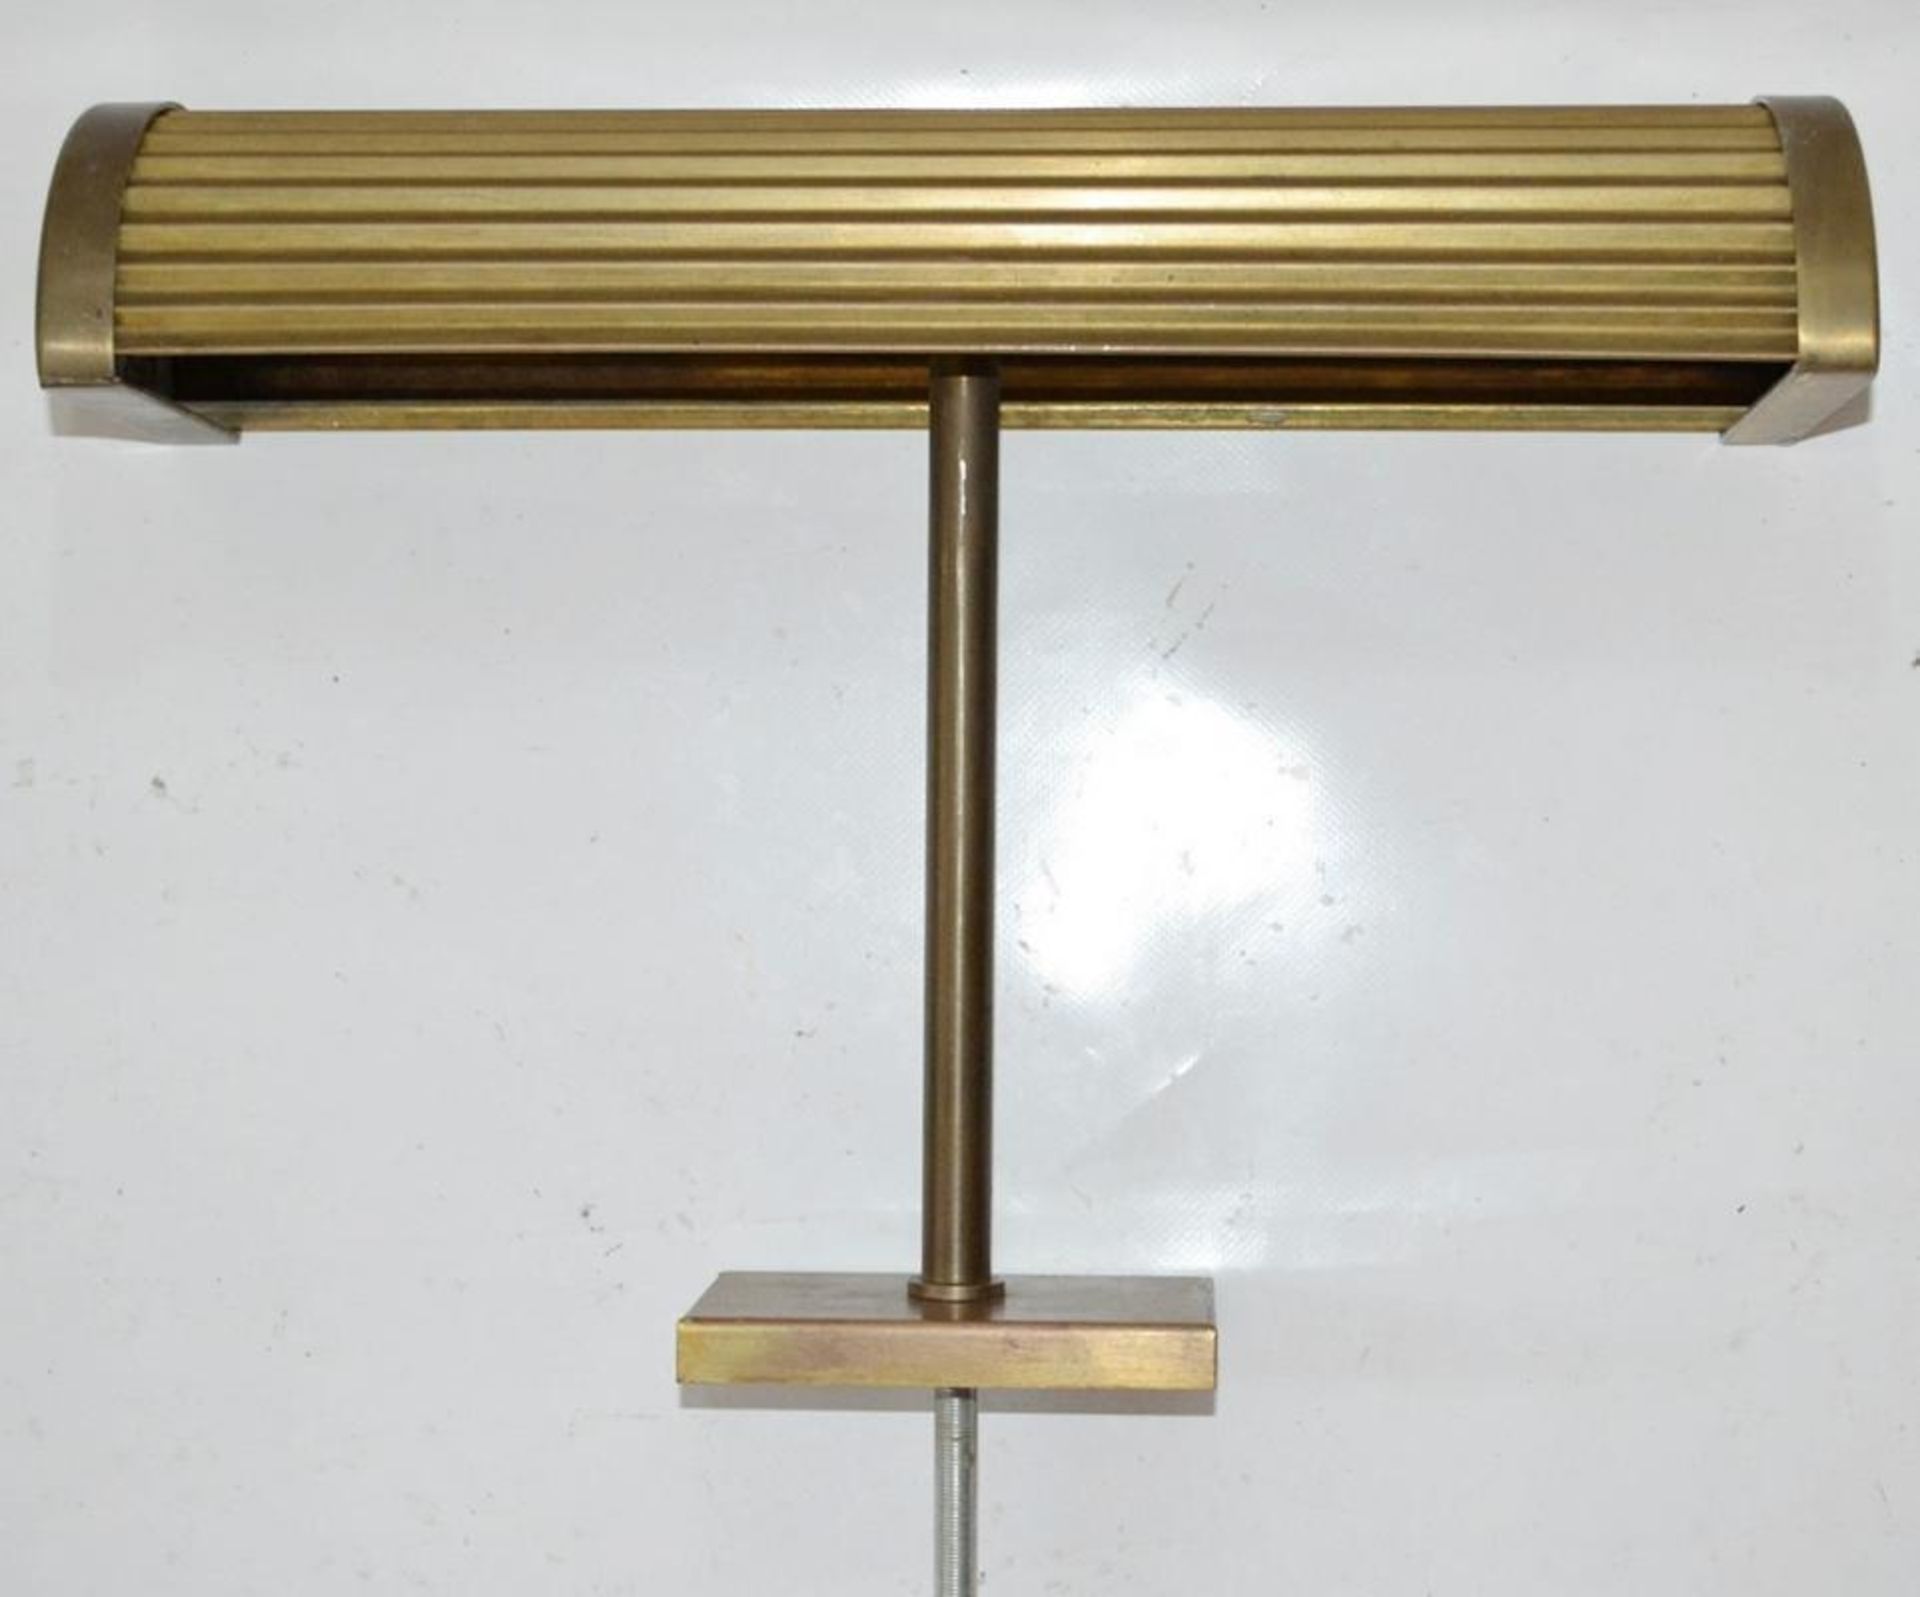 4 x Art Deco Style Table Mounted Lights In Brass - Recently Removed From A City Centre Brasserie In - Image 4 of 8